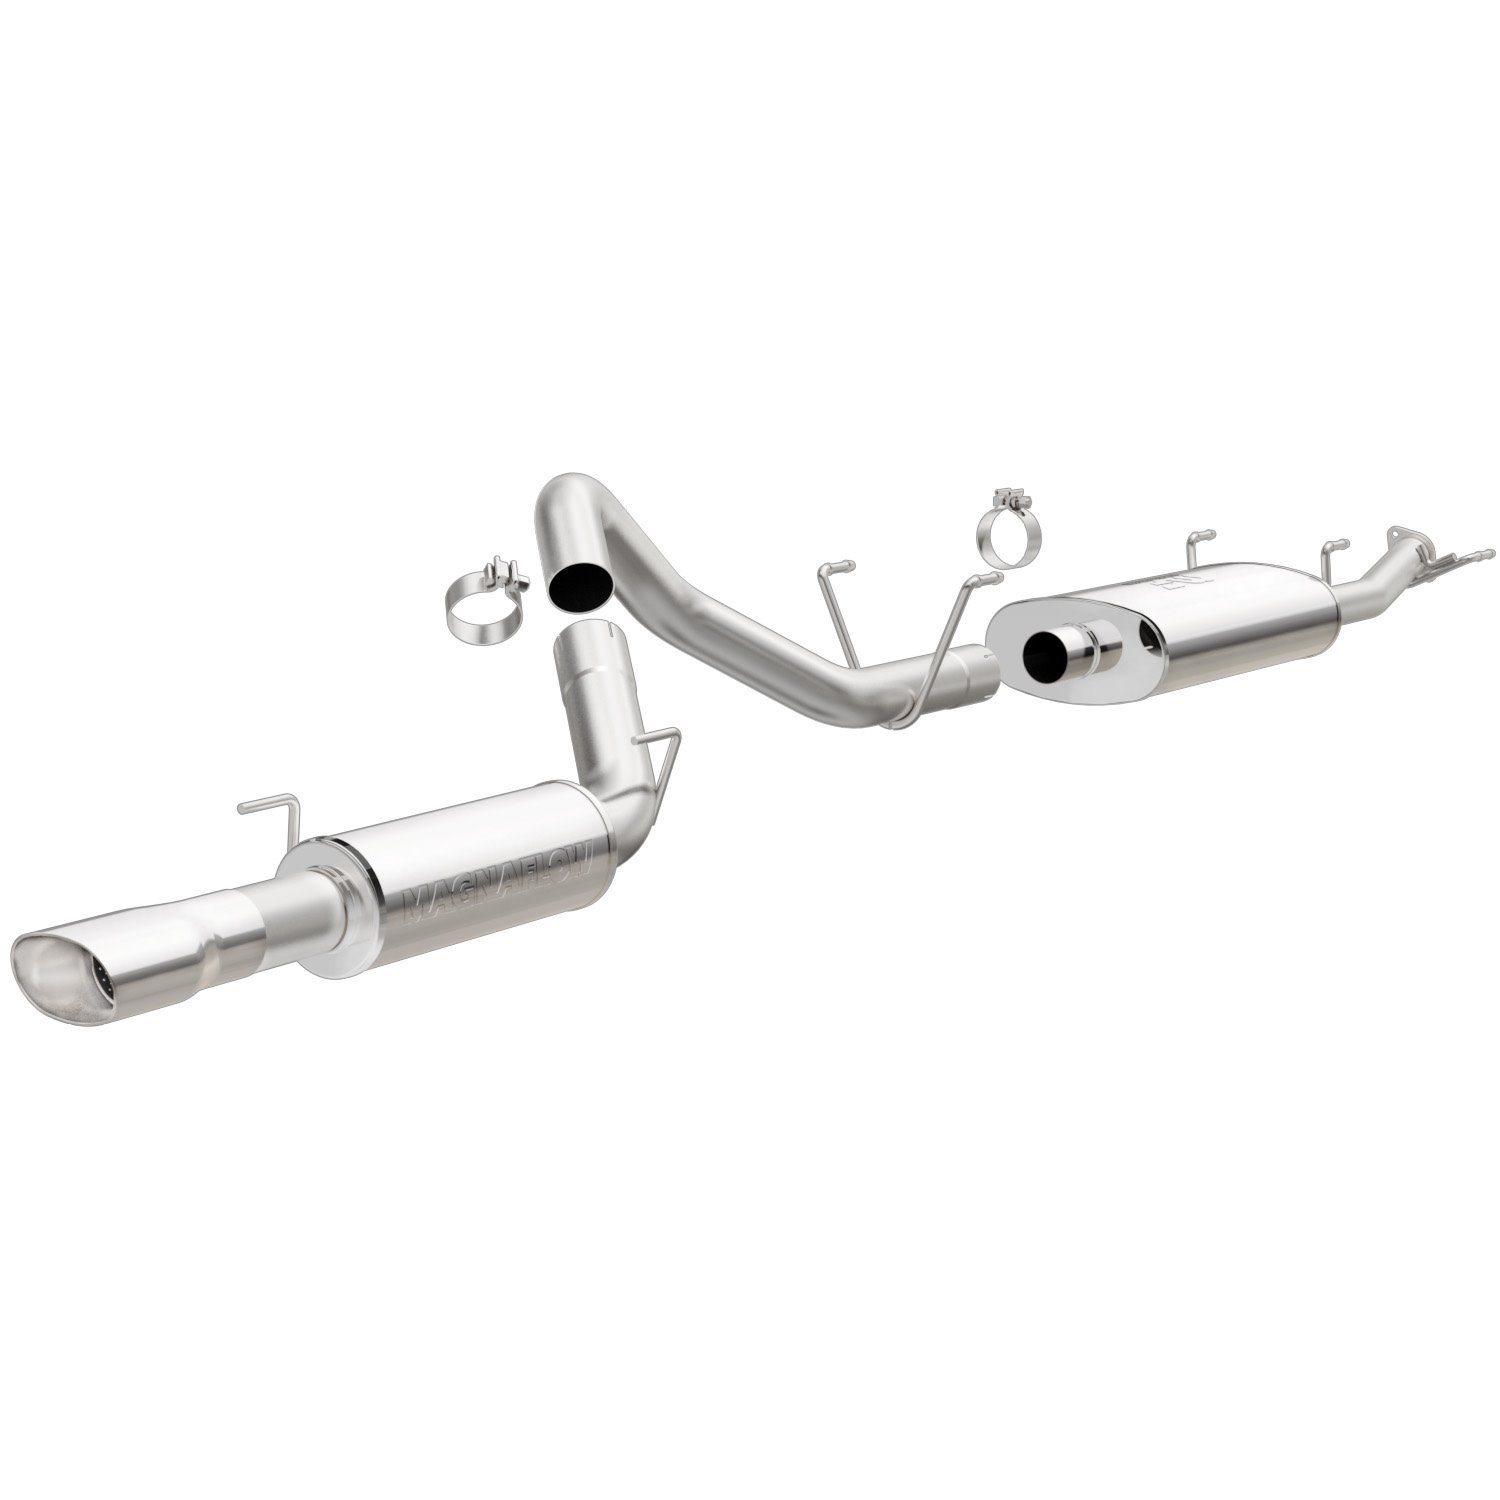 MF Series Cat-Back Exhaust System 2001-06 Toyota Sequoia 4.7L V8